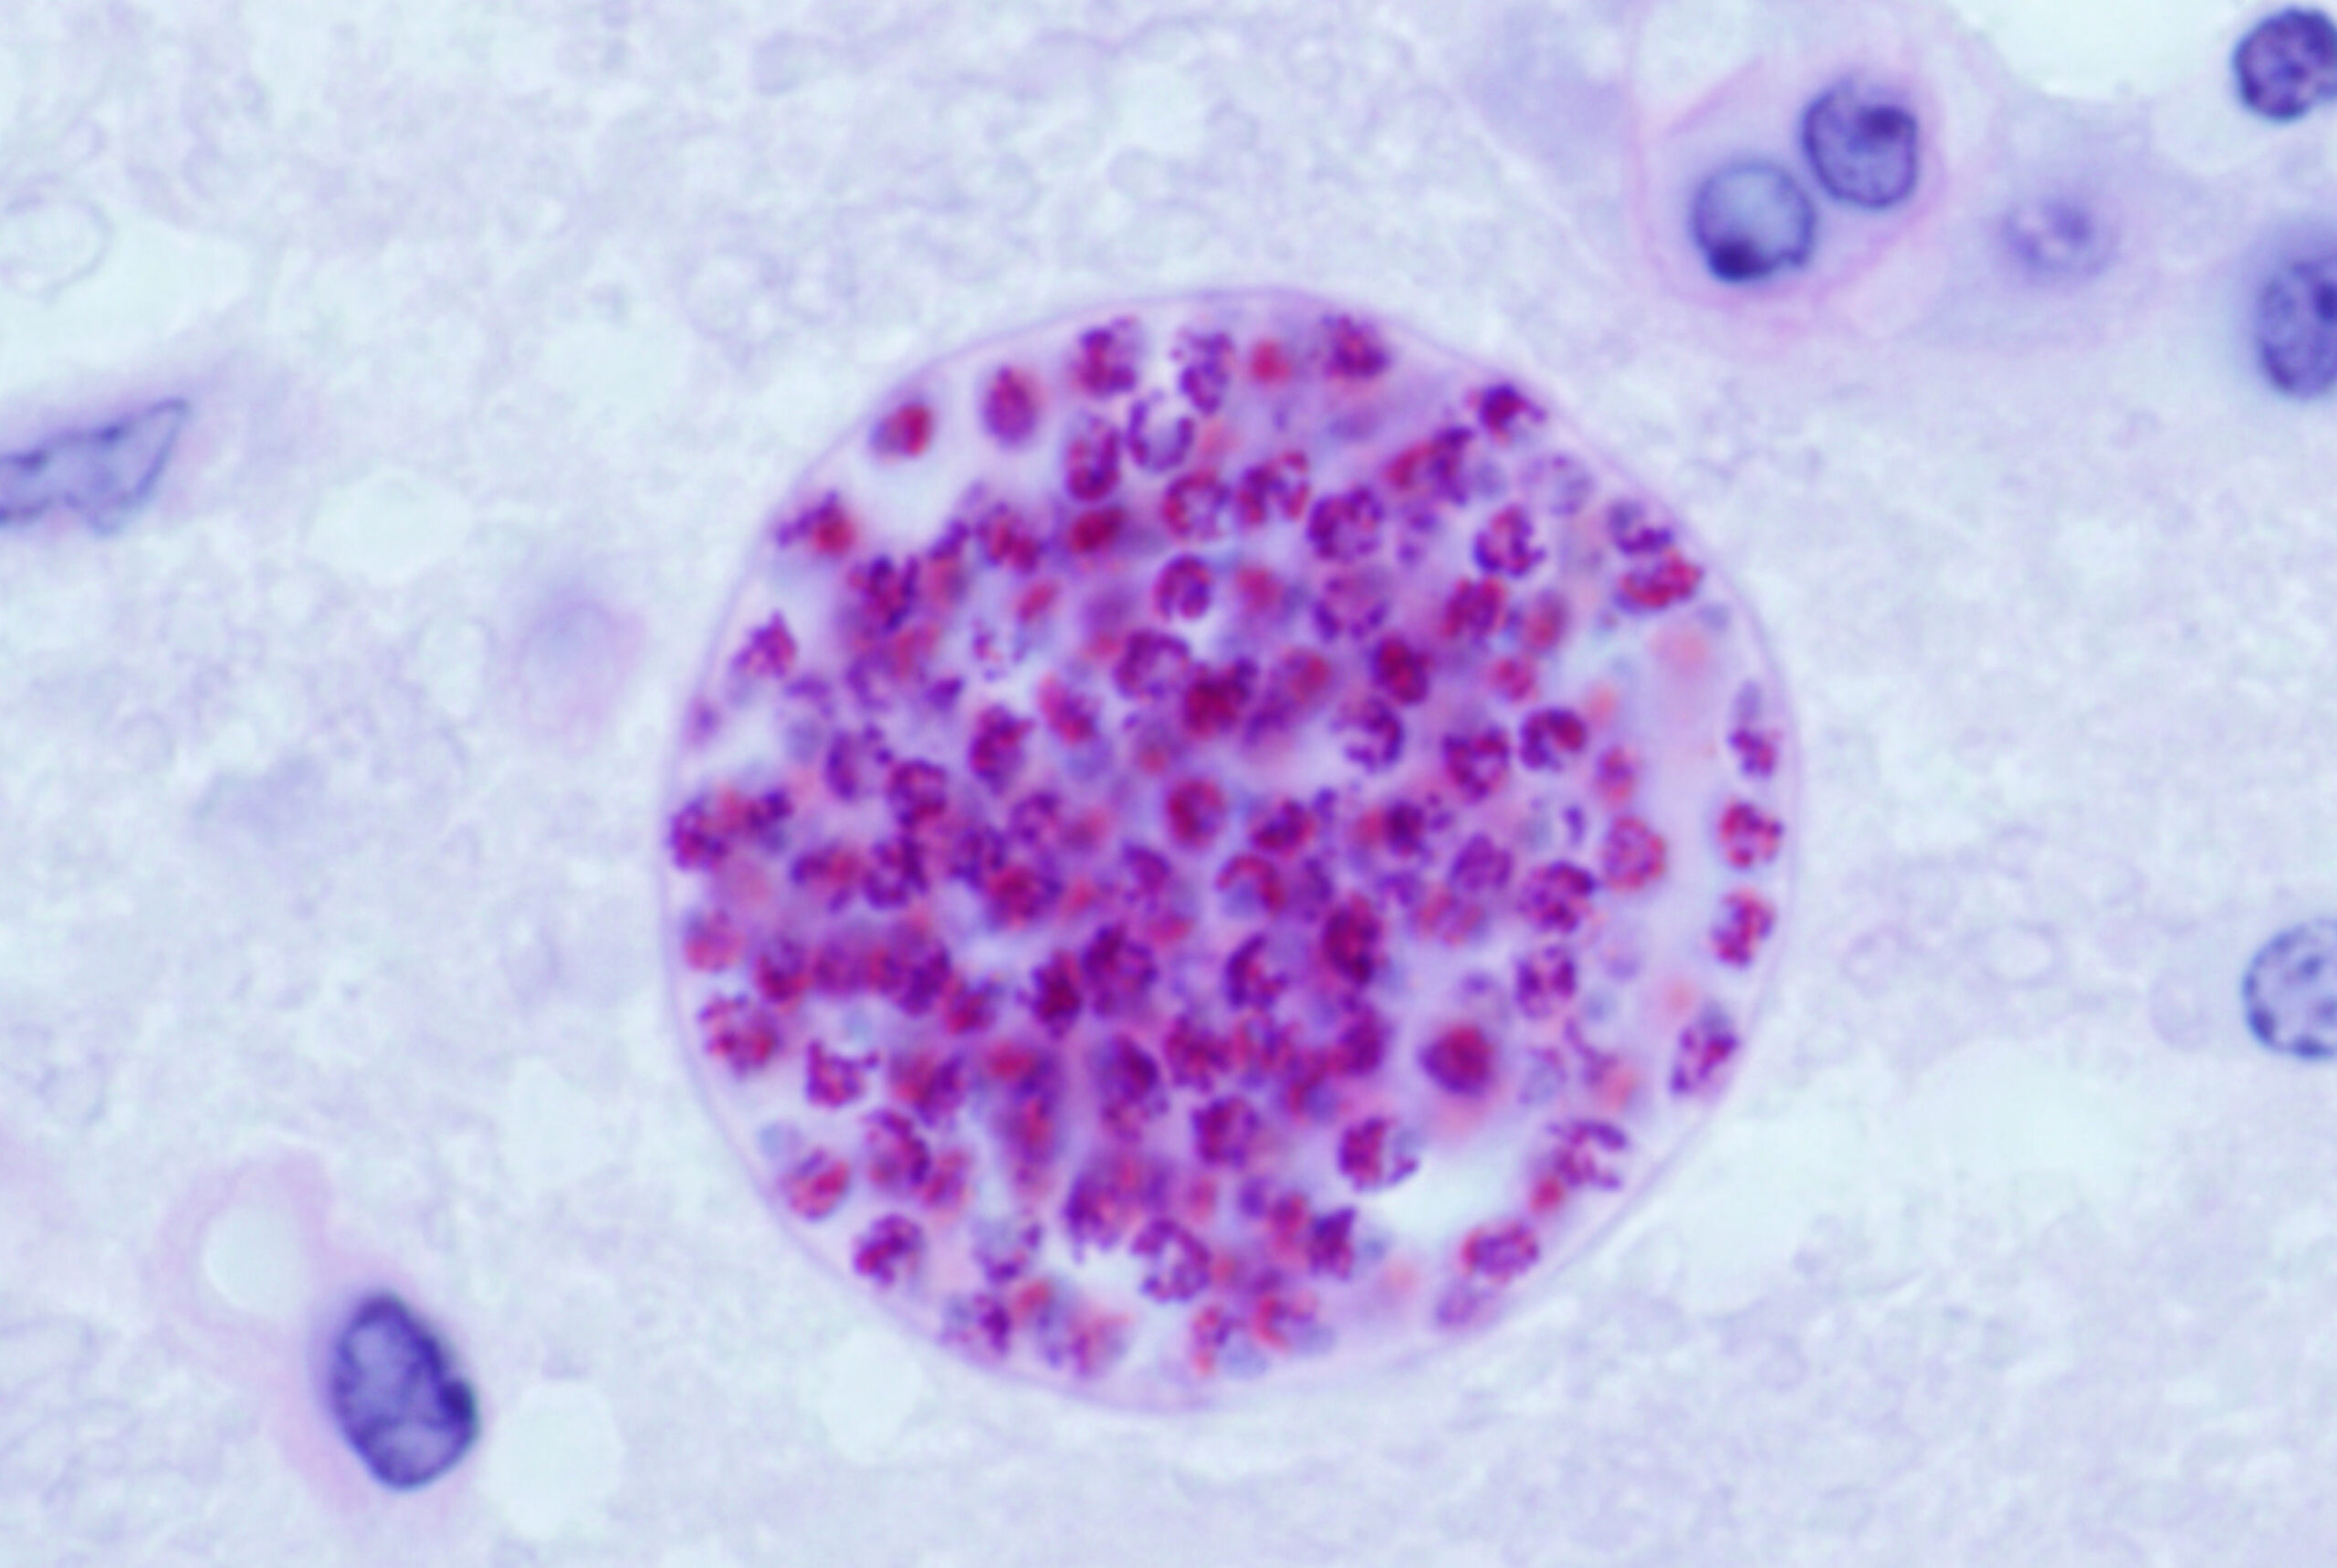 Toxoplasma gondii tissue cyst in a mouse brain.